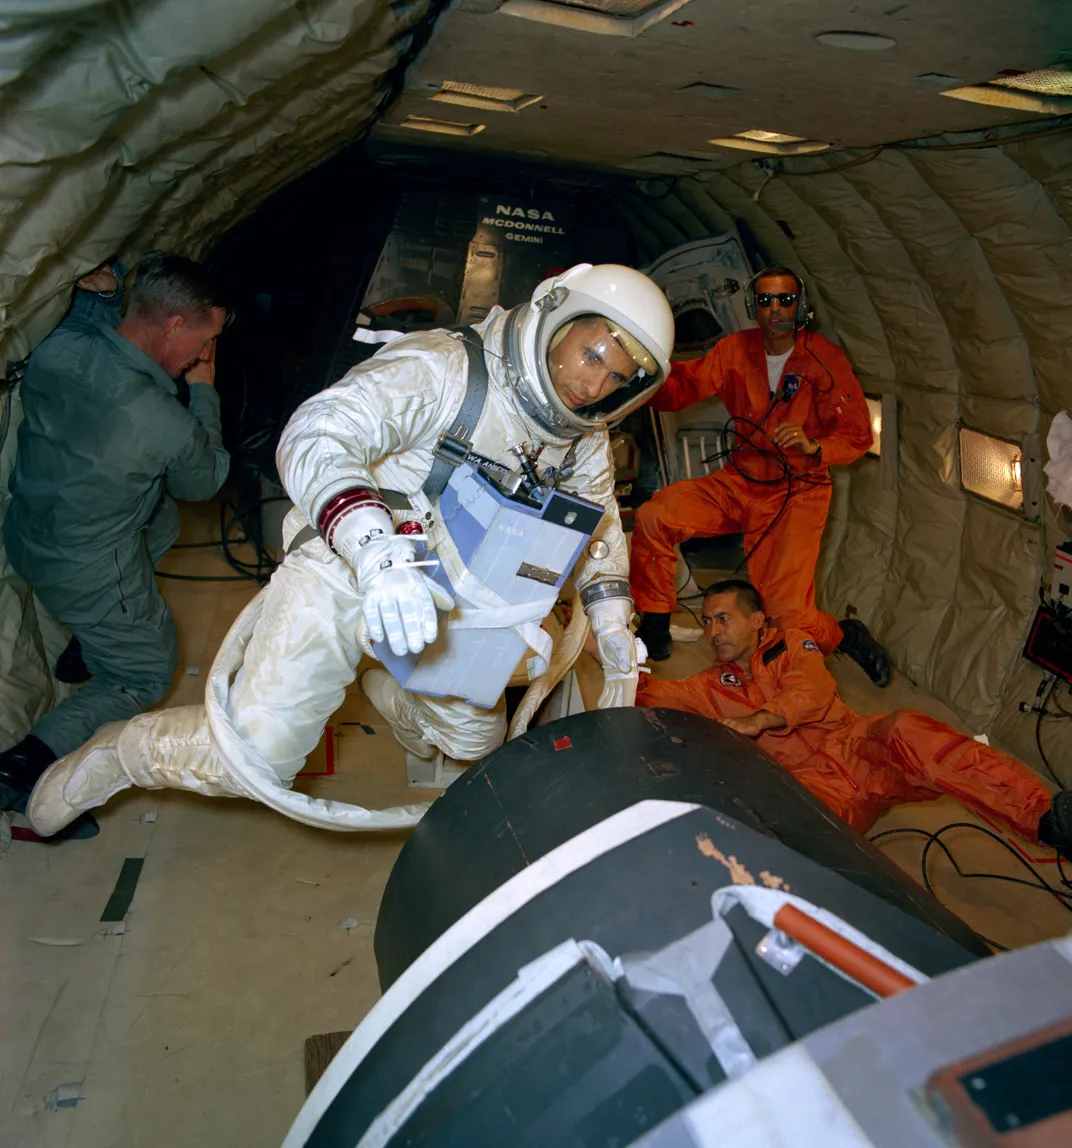 Anders, as the backup crew pilot of the Gemini-11 spaceflight, participates in extravehicular activity training under zero-gravity conditions.